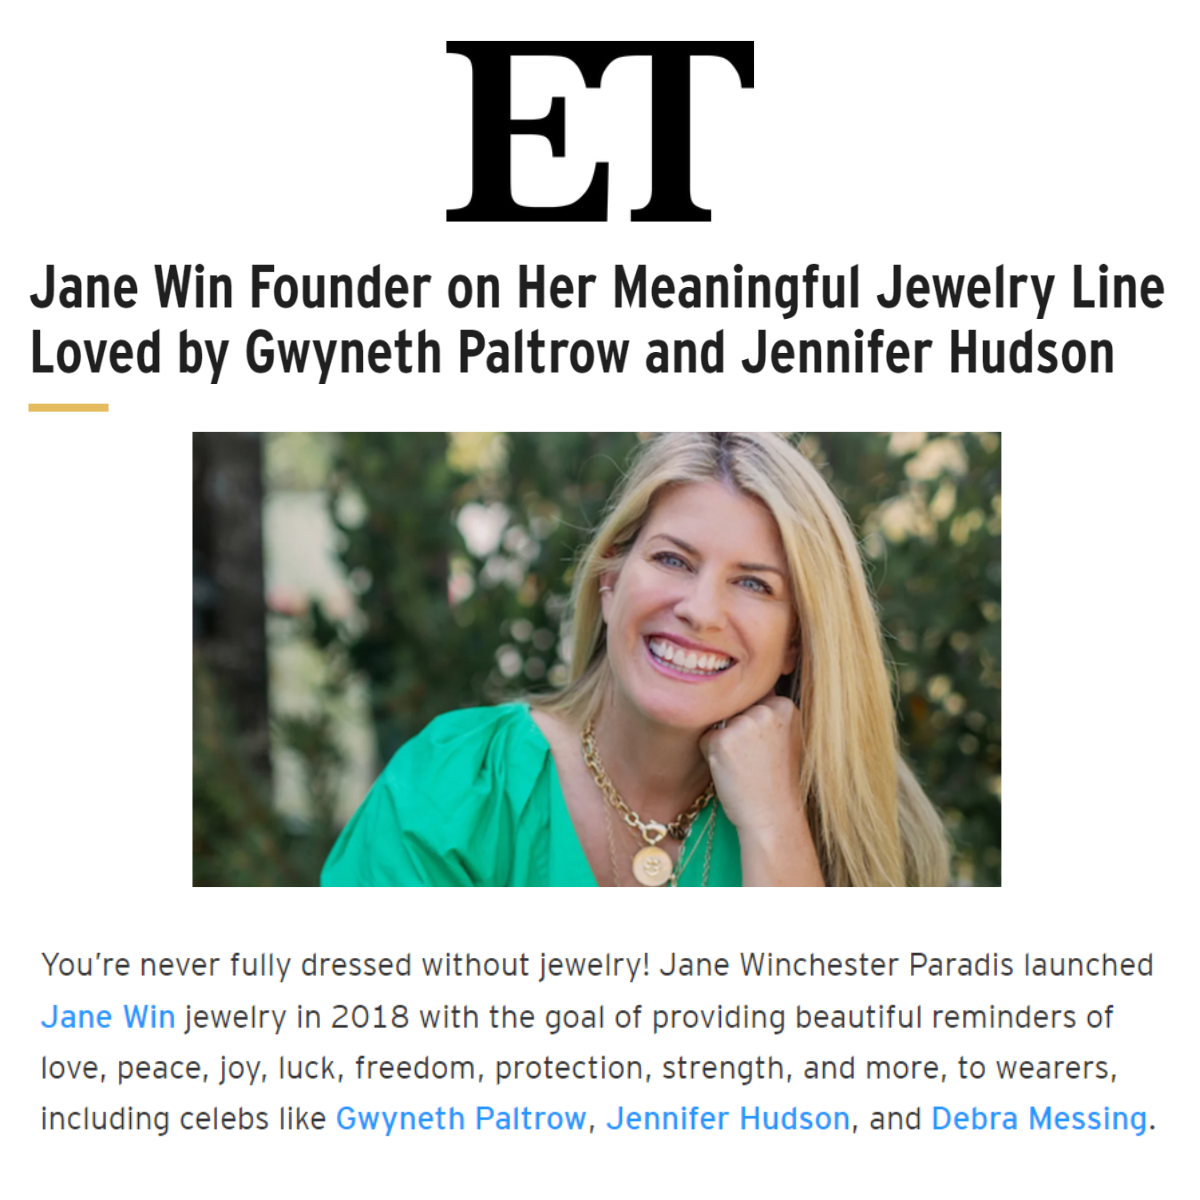 Press Highlight: Entertainment Tonight Interviews Jane On Meaningful Jewelry, Loved by Gwyneth Paltrow and Jennifer Hudson